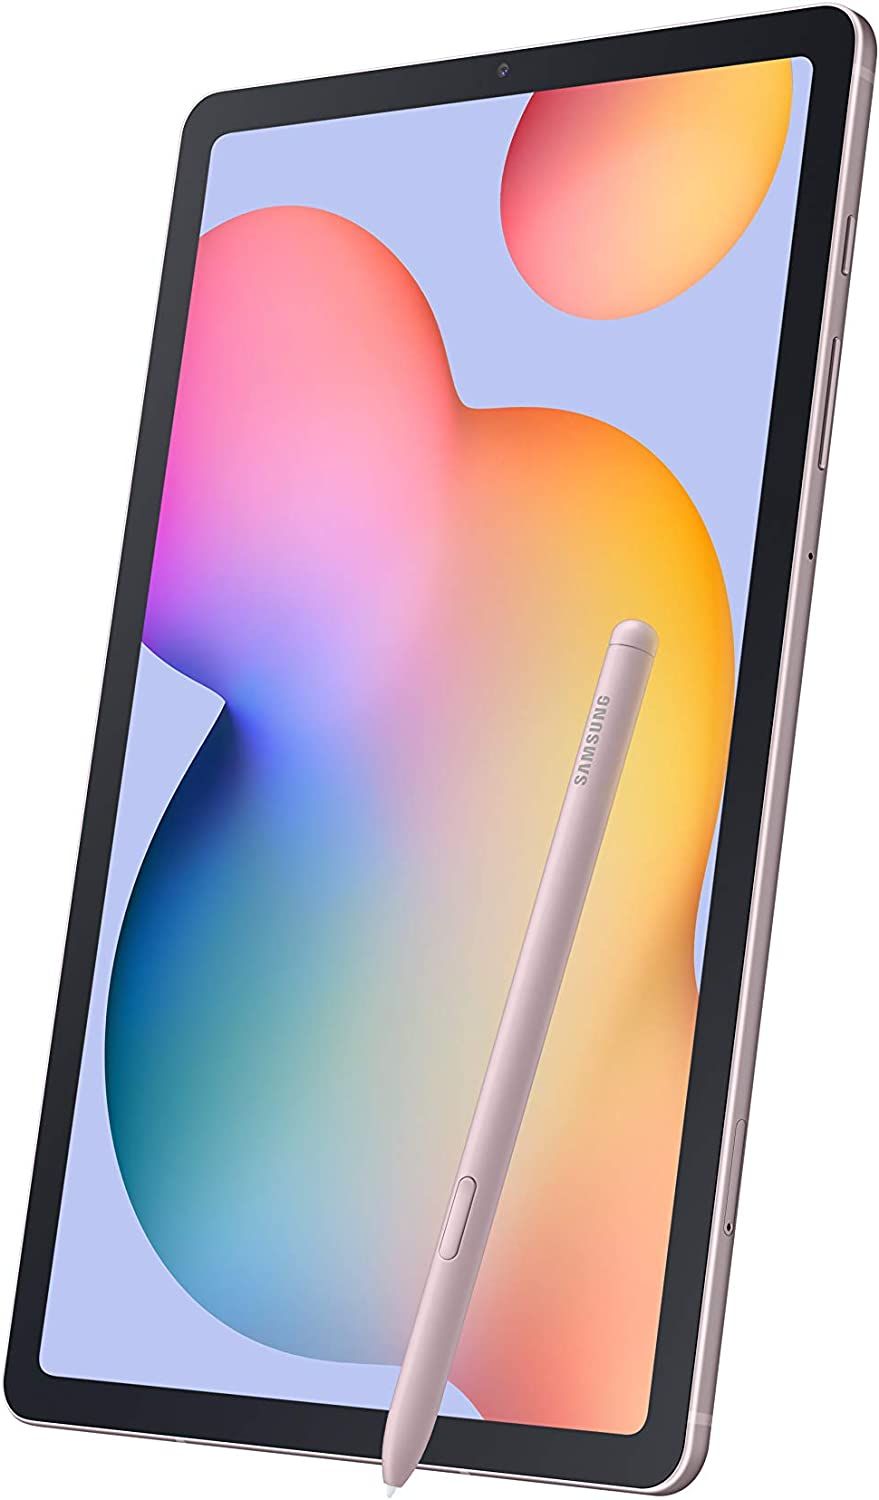 Samsung 10.4" Galaxy tablet with a white stylus